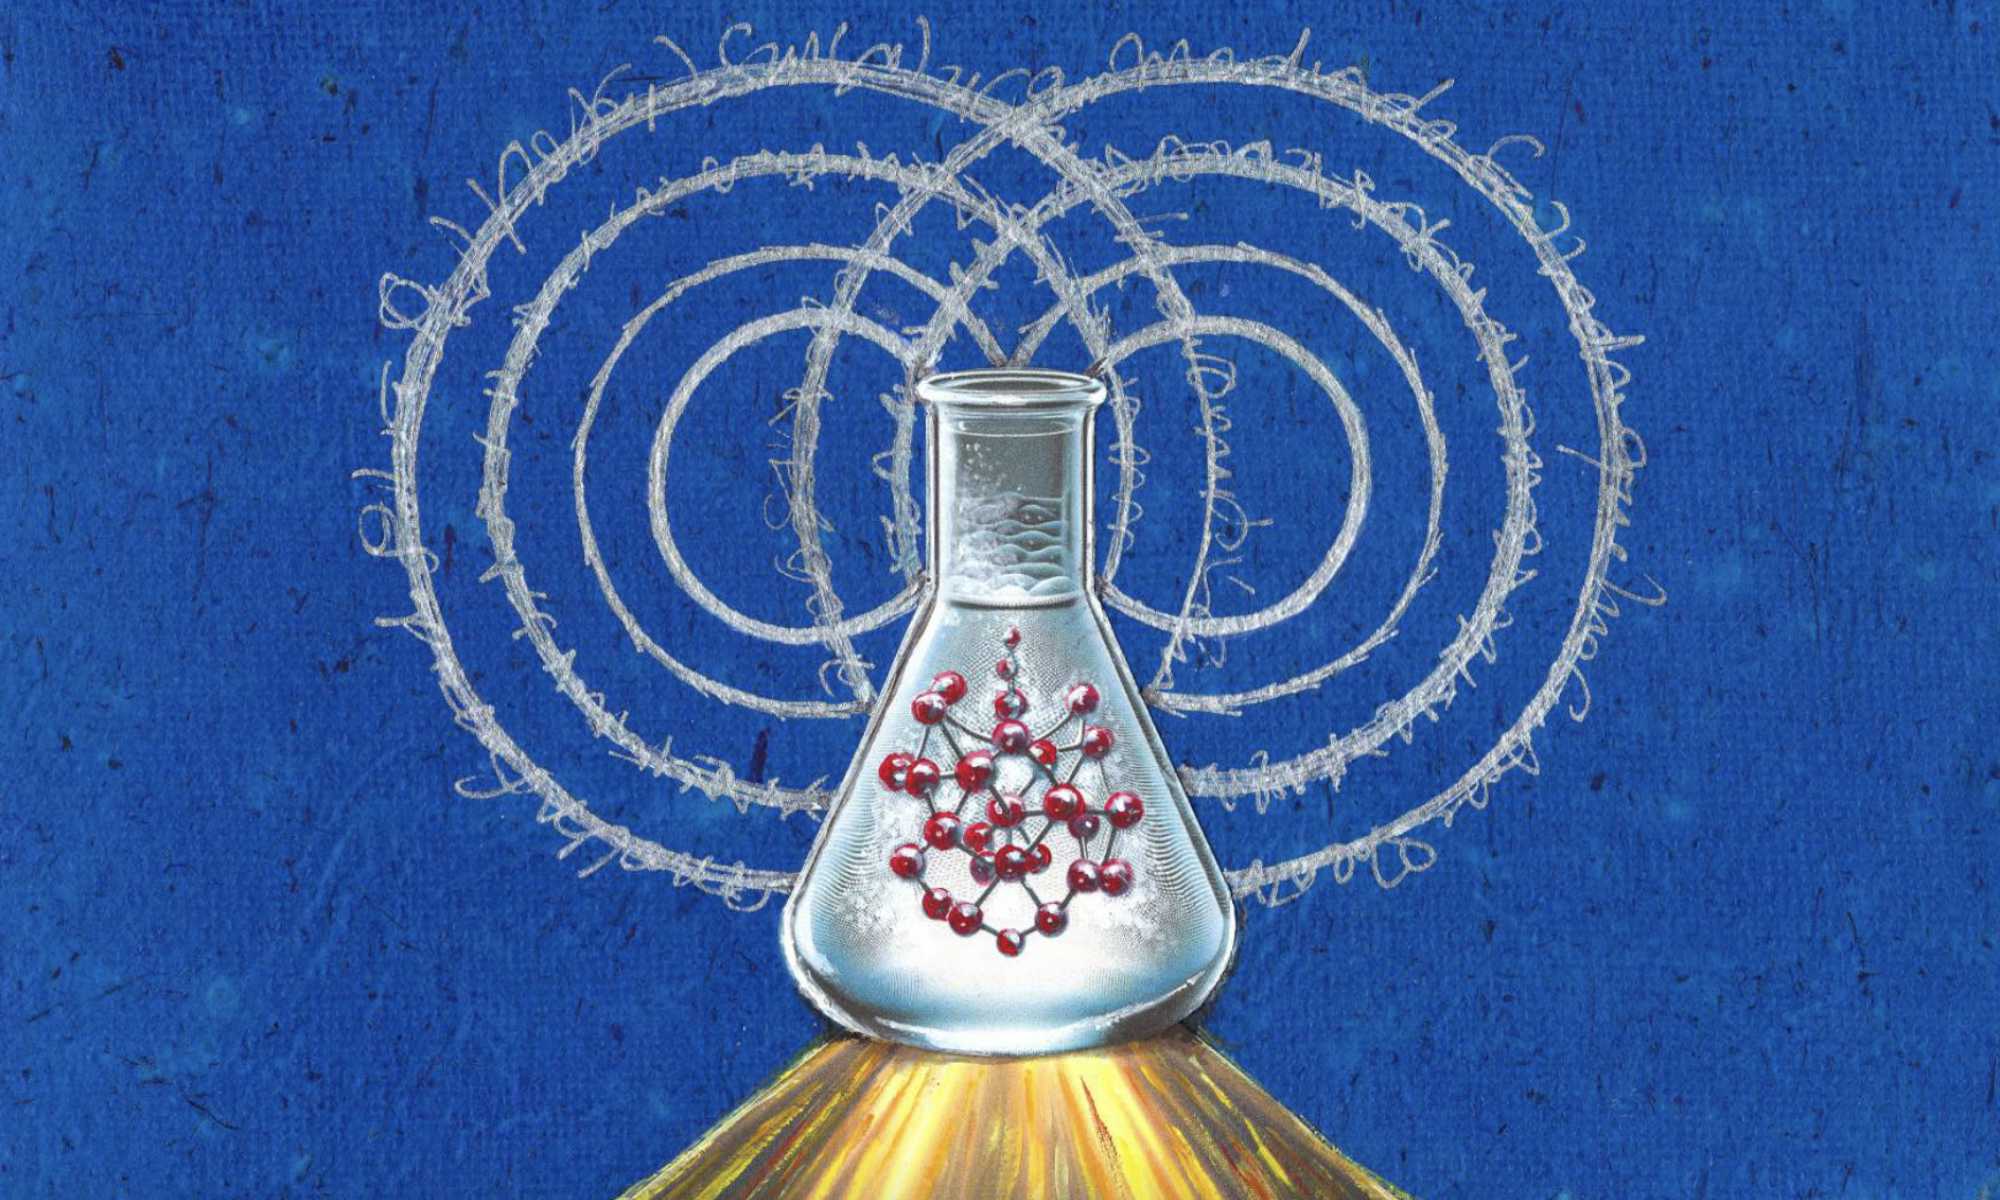 Mixed media illustration showing full chemical complexity of quantum decoherence.